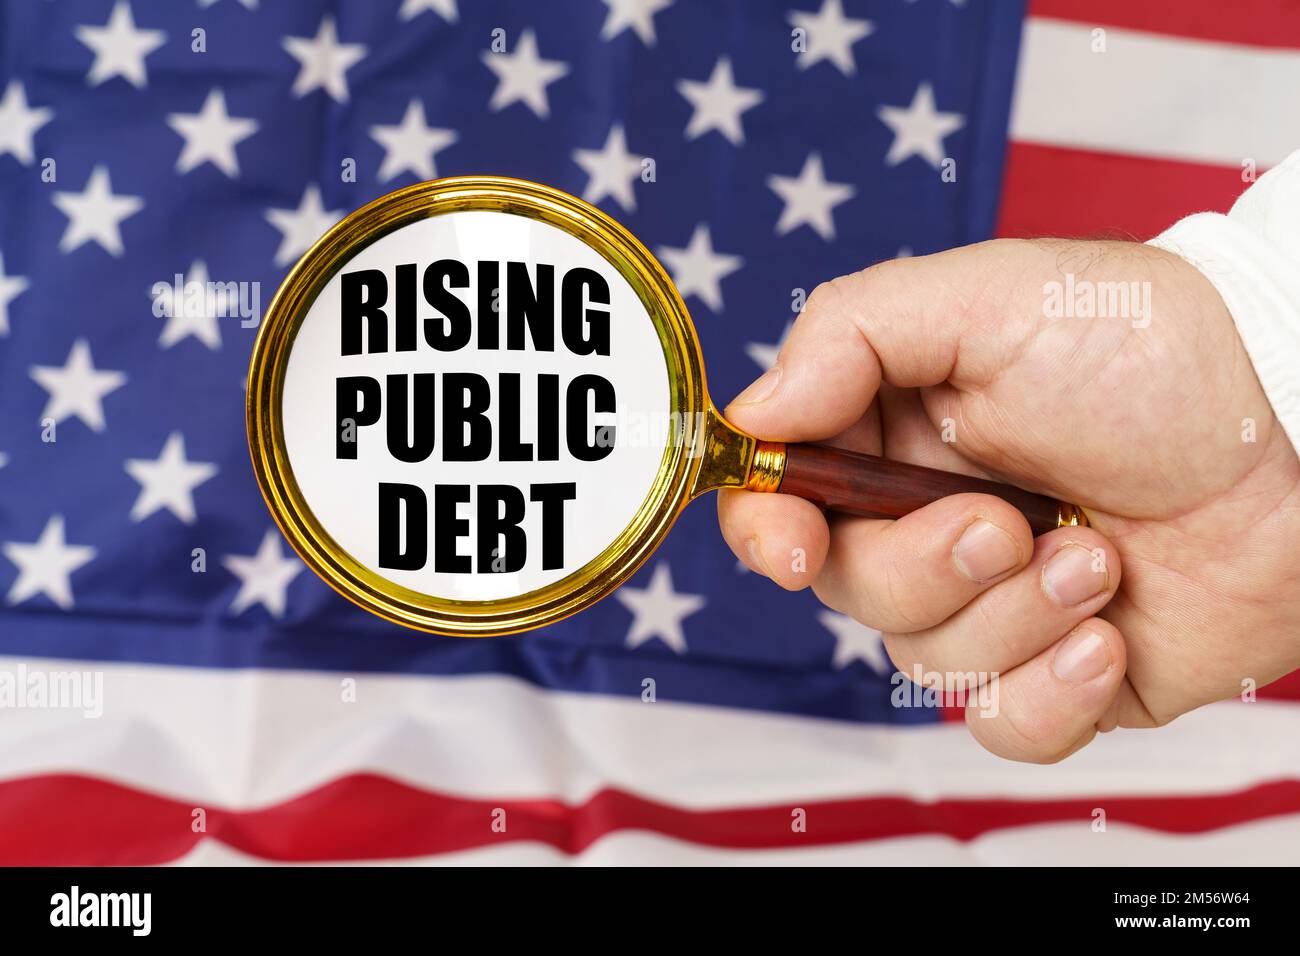 In front of the American flag, a man holds a magnifying glass in his hand with the inscription - rising public debt. Stock Photo